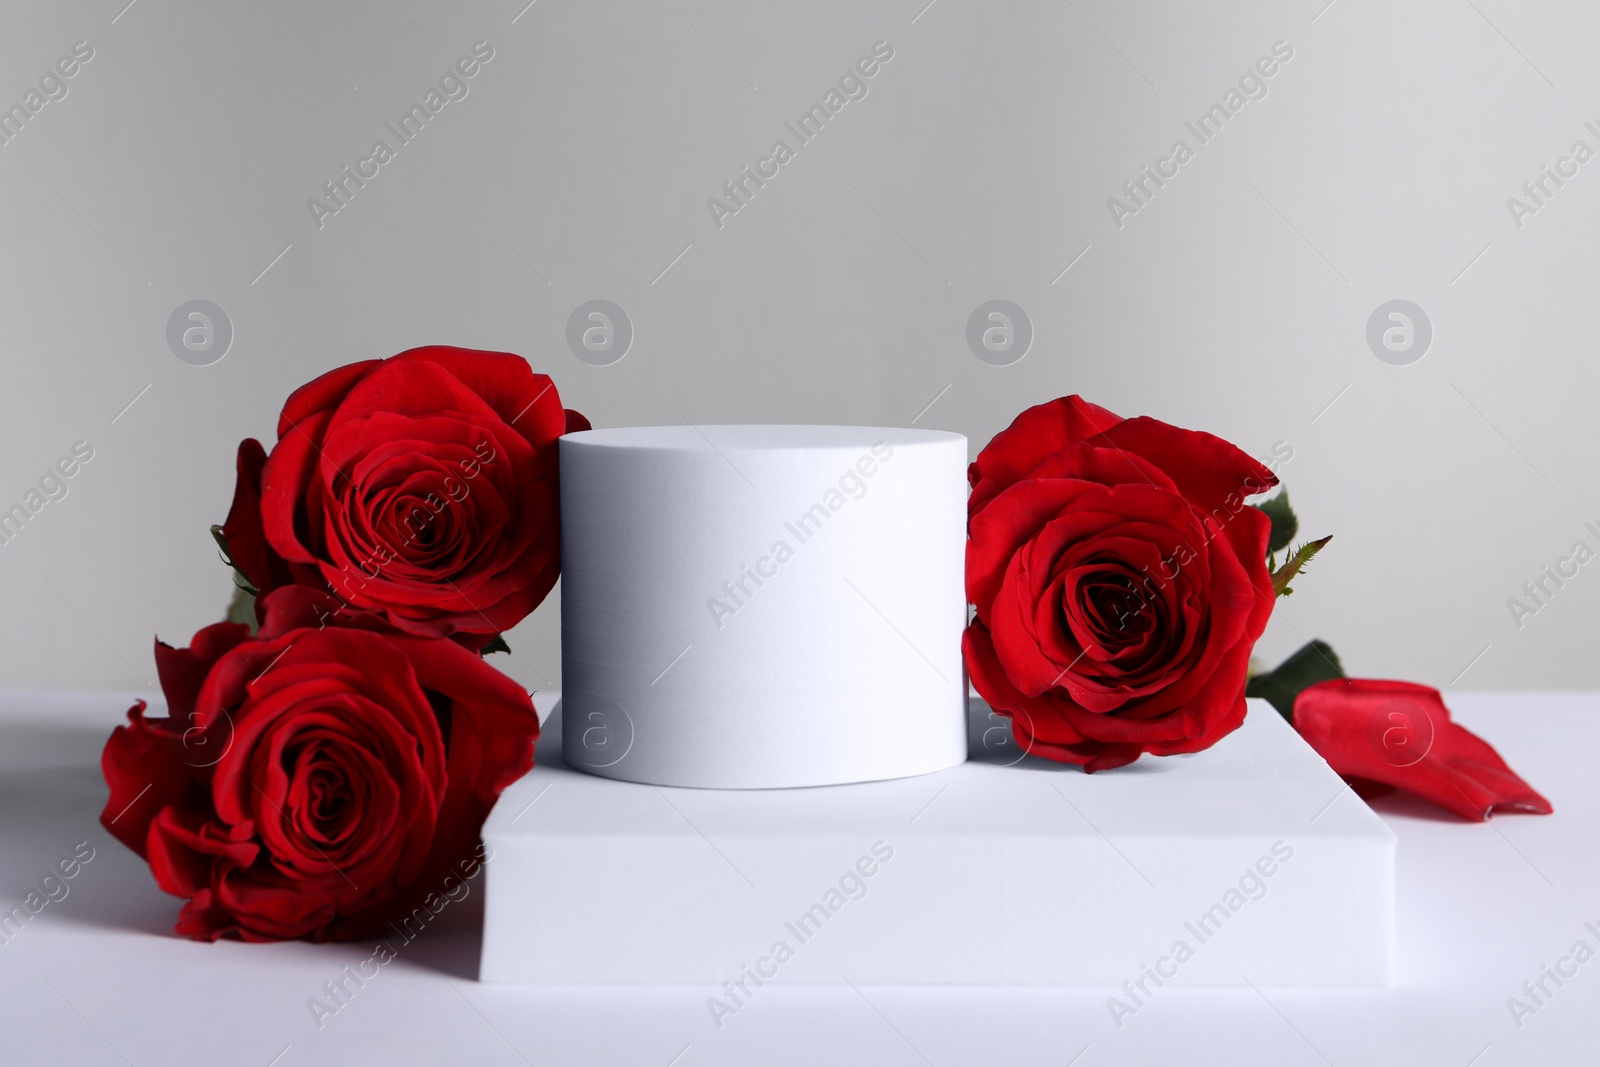 Photo of Stylish presentation for product. Beautiful red roses and geometric figures on light background